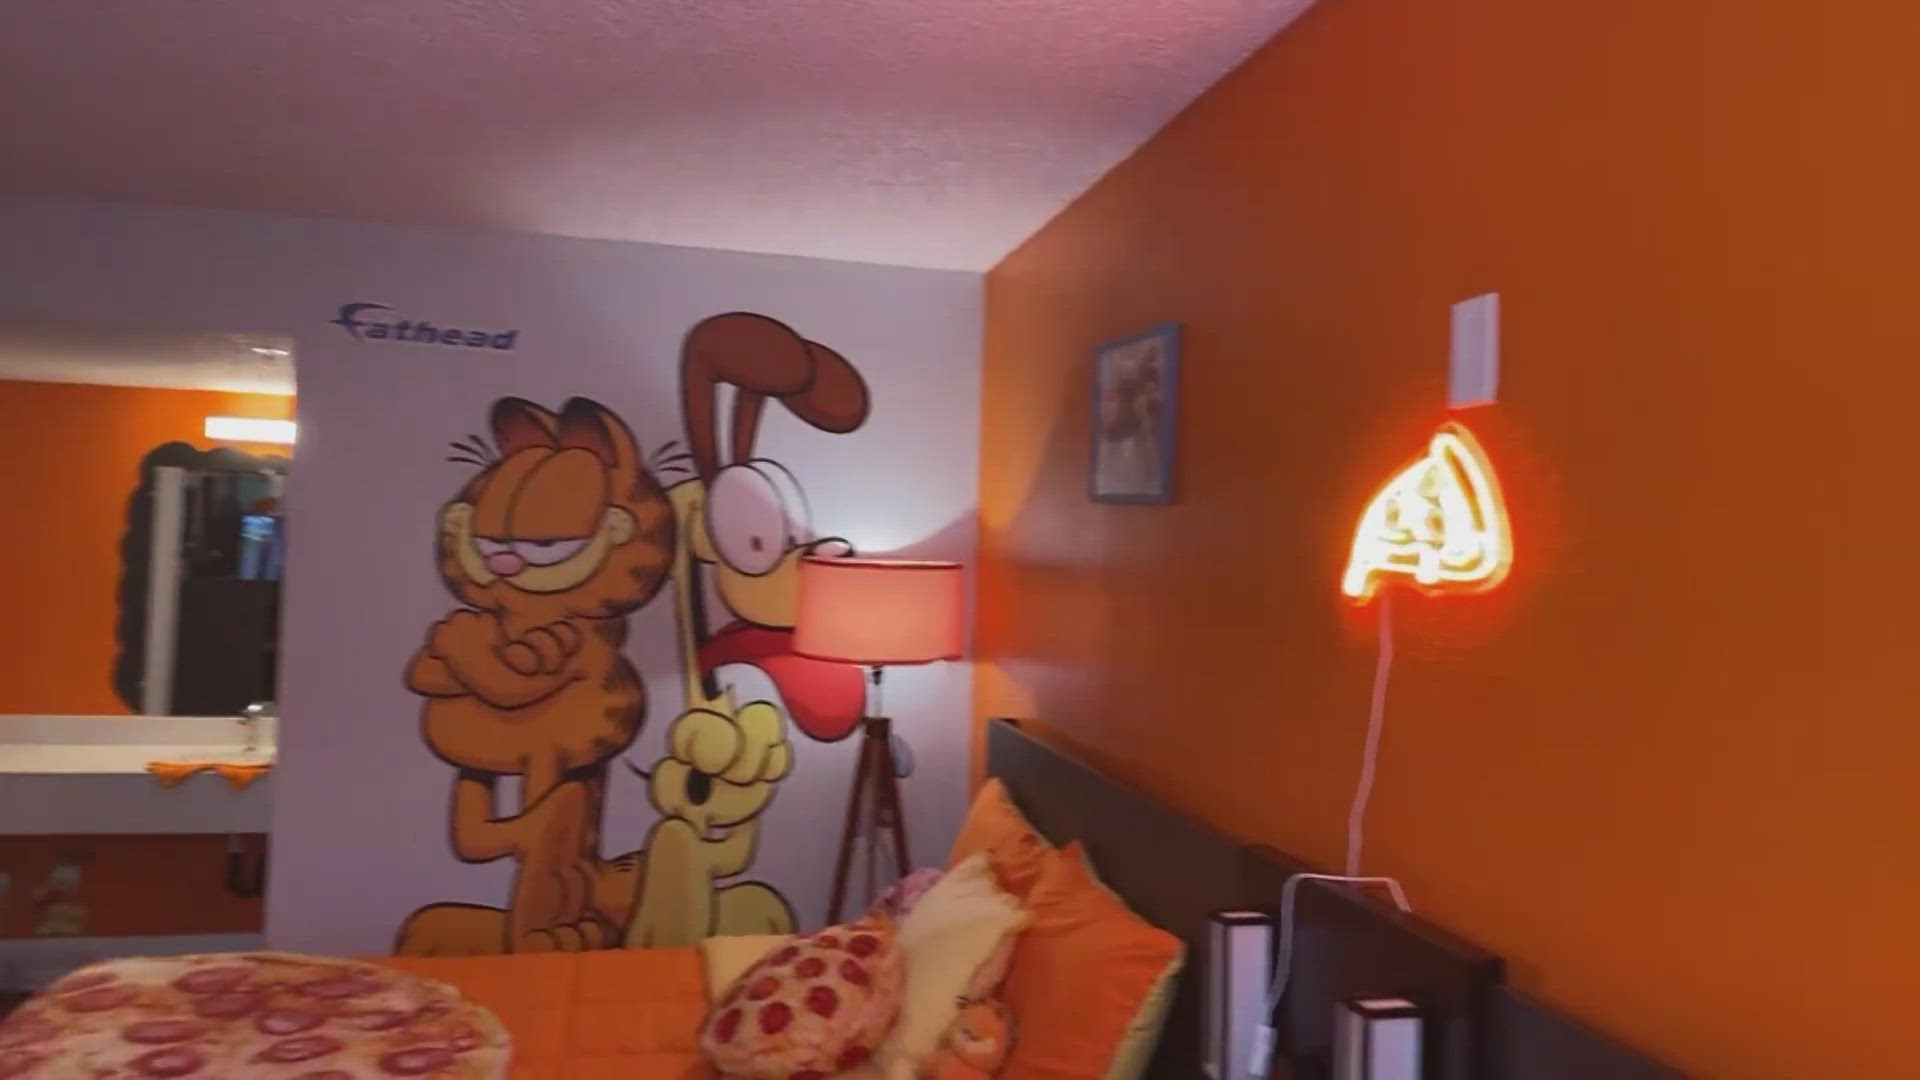 You could stay in a Garfield-themed motel room. Here's where.